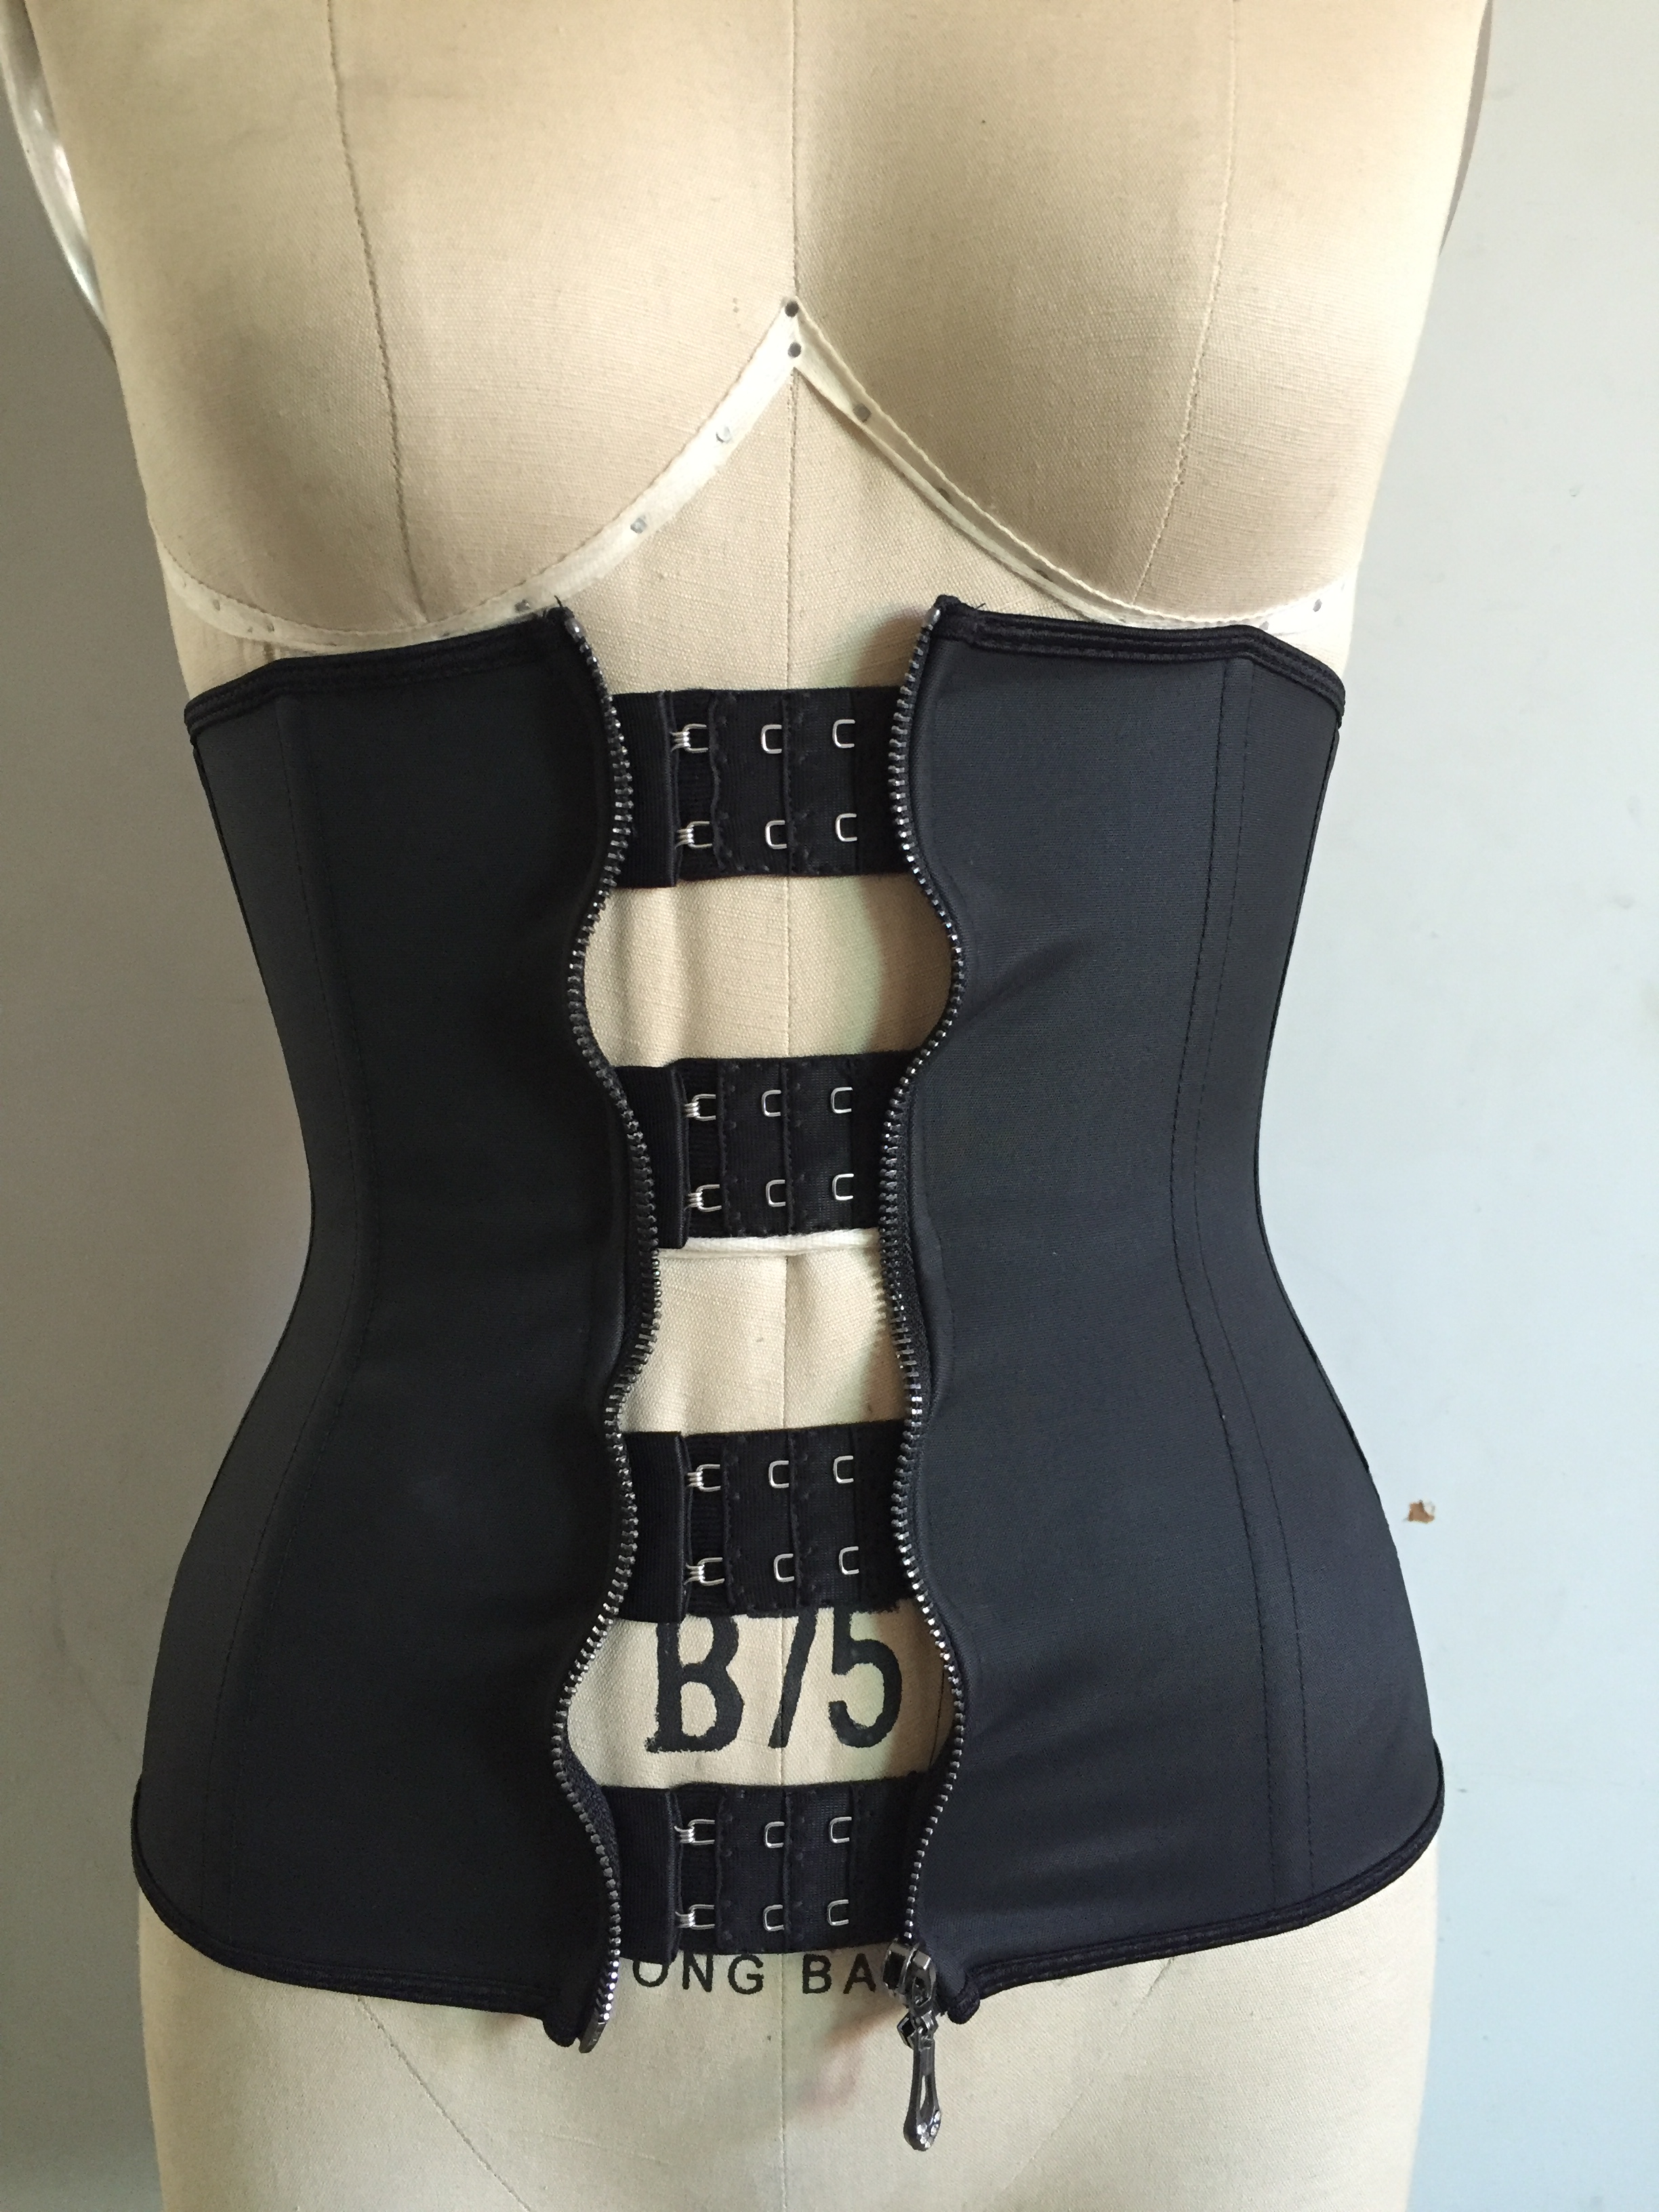 Hot money zipper, rubber body, 4 rows of buttons to reinforce latex ...